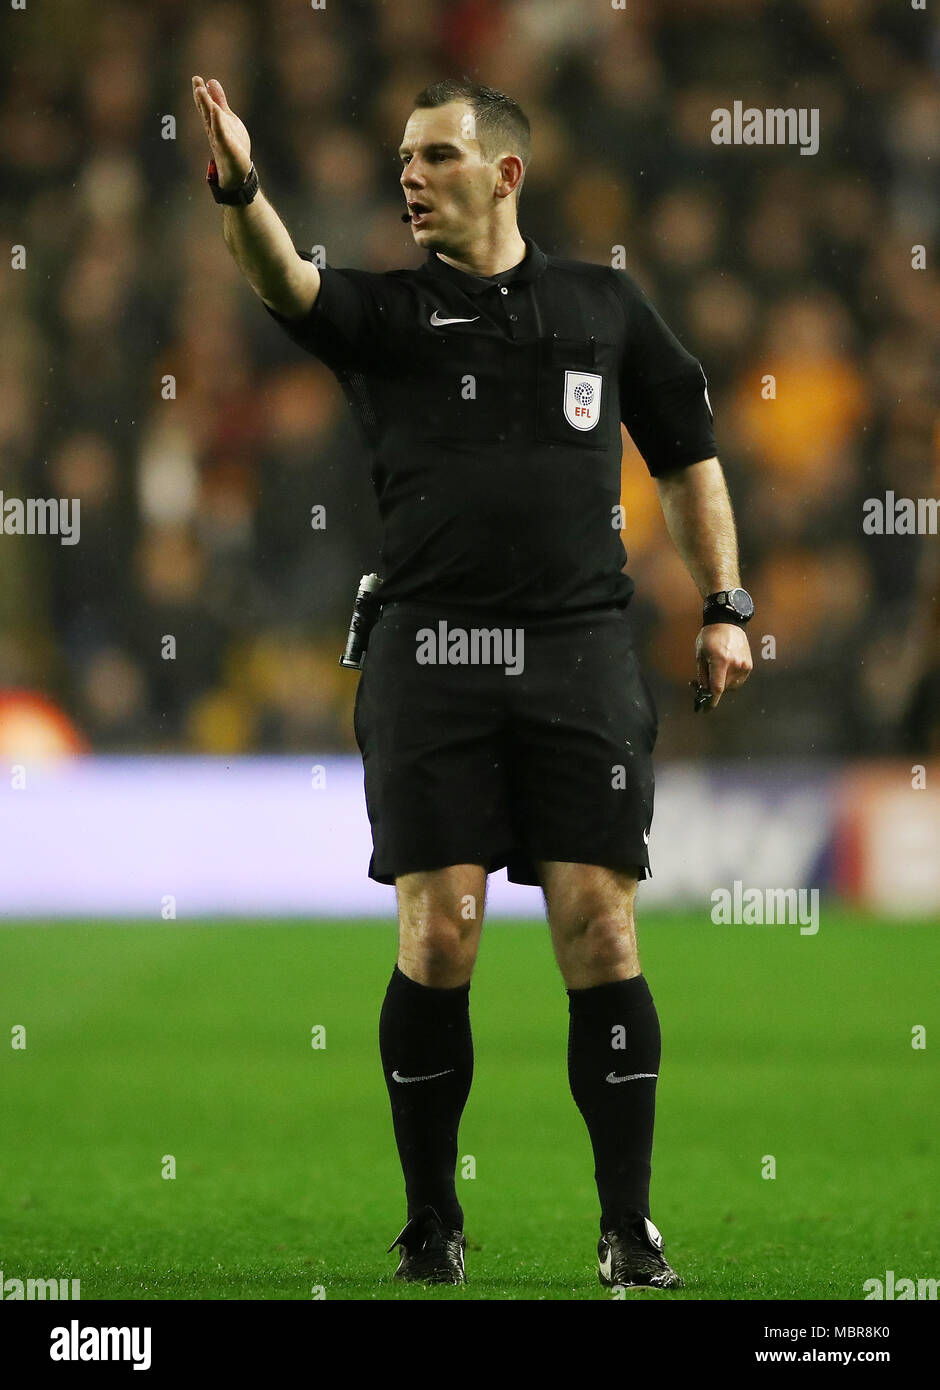 Referee Tim Robinson during the Sky Bet Championship match at Molineux, Wolverhampton. PRESS ASSOCIATION Photo. Picture date: Wednesday April 11, 2018. See PA story SOCCER Wolves. Photo credit should read: Nick Potts/PA Wire. RESTRICTIONS: No use with unauthorised audio, video, data, fixture lists, club/league logos or 'live' services. Online in-match use limited to 75 images, no video emulation. No use in betting, games or single club/league/player publications. Stock Photo